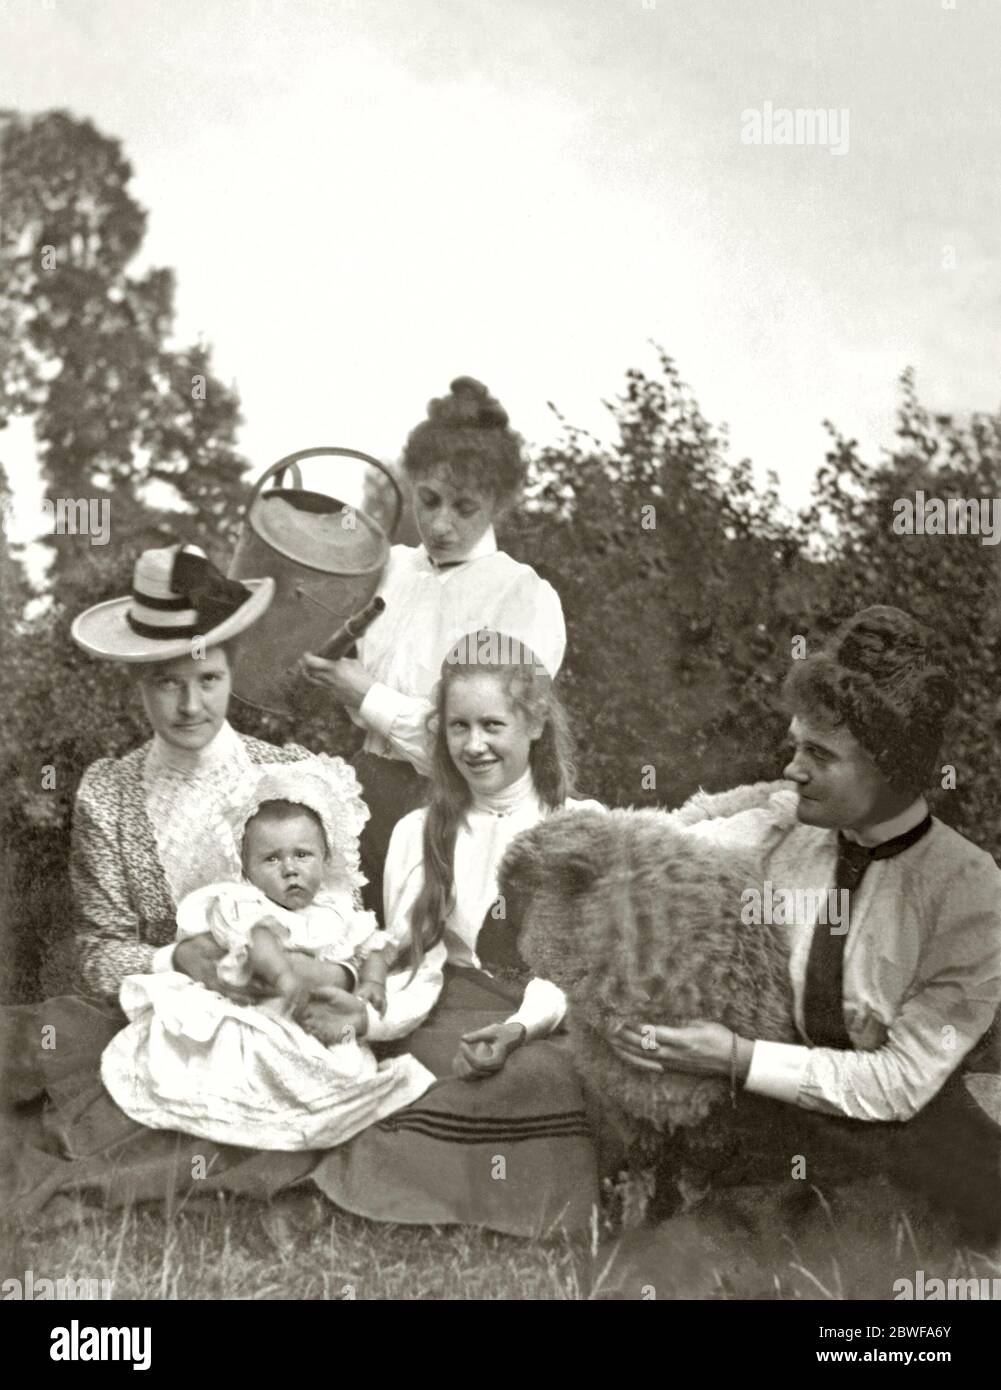 Four women (and surprisingly a sheep) find an amusing way of wetting the baby's head using a watering can on a Gloucestershire farm, England, UK c. 1900. To 'wet the baby's head' is a term used to celebrate the birth of a baby. Traditionally taking its name from the ceremony of a Christian baptism, during which the head of a baby would be anointed with holy water, the phrase now commonly relates to the general celebration of the new arrival. Stock Photo